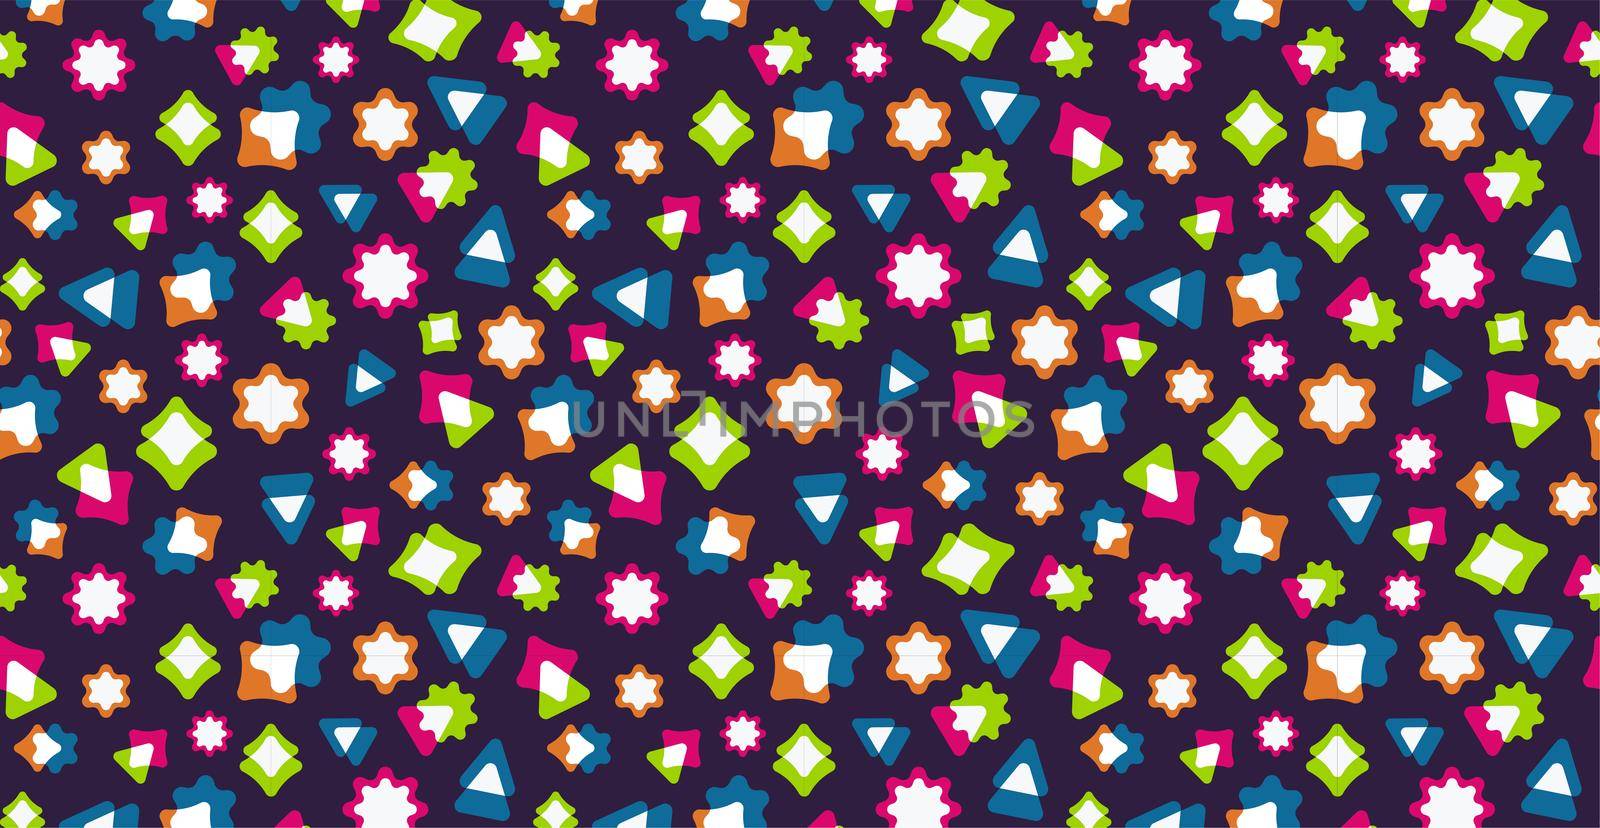 Cute colorful doodles. Bright geometric pattern. Festive children's background. Can be used for wallpaper, background, web background, fabric, wrapping paper, digital paper.